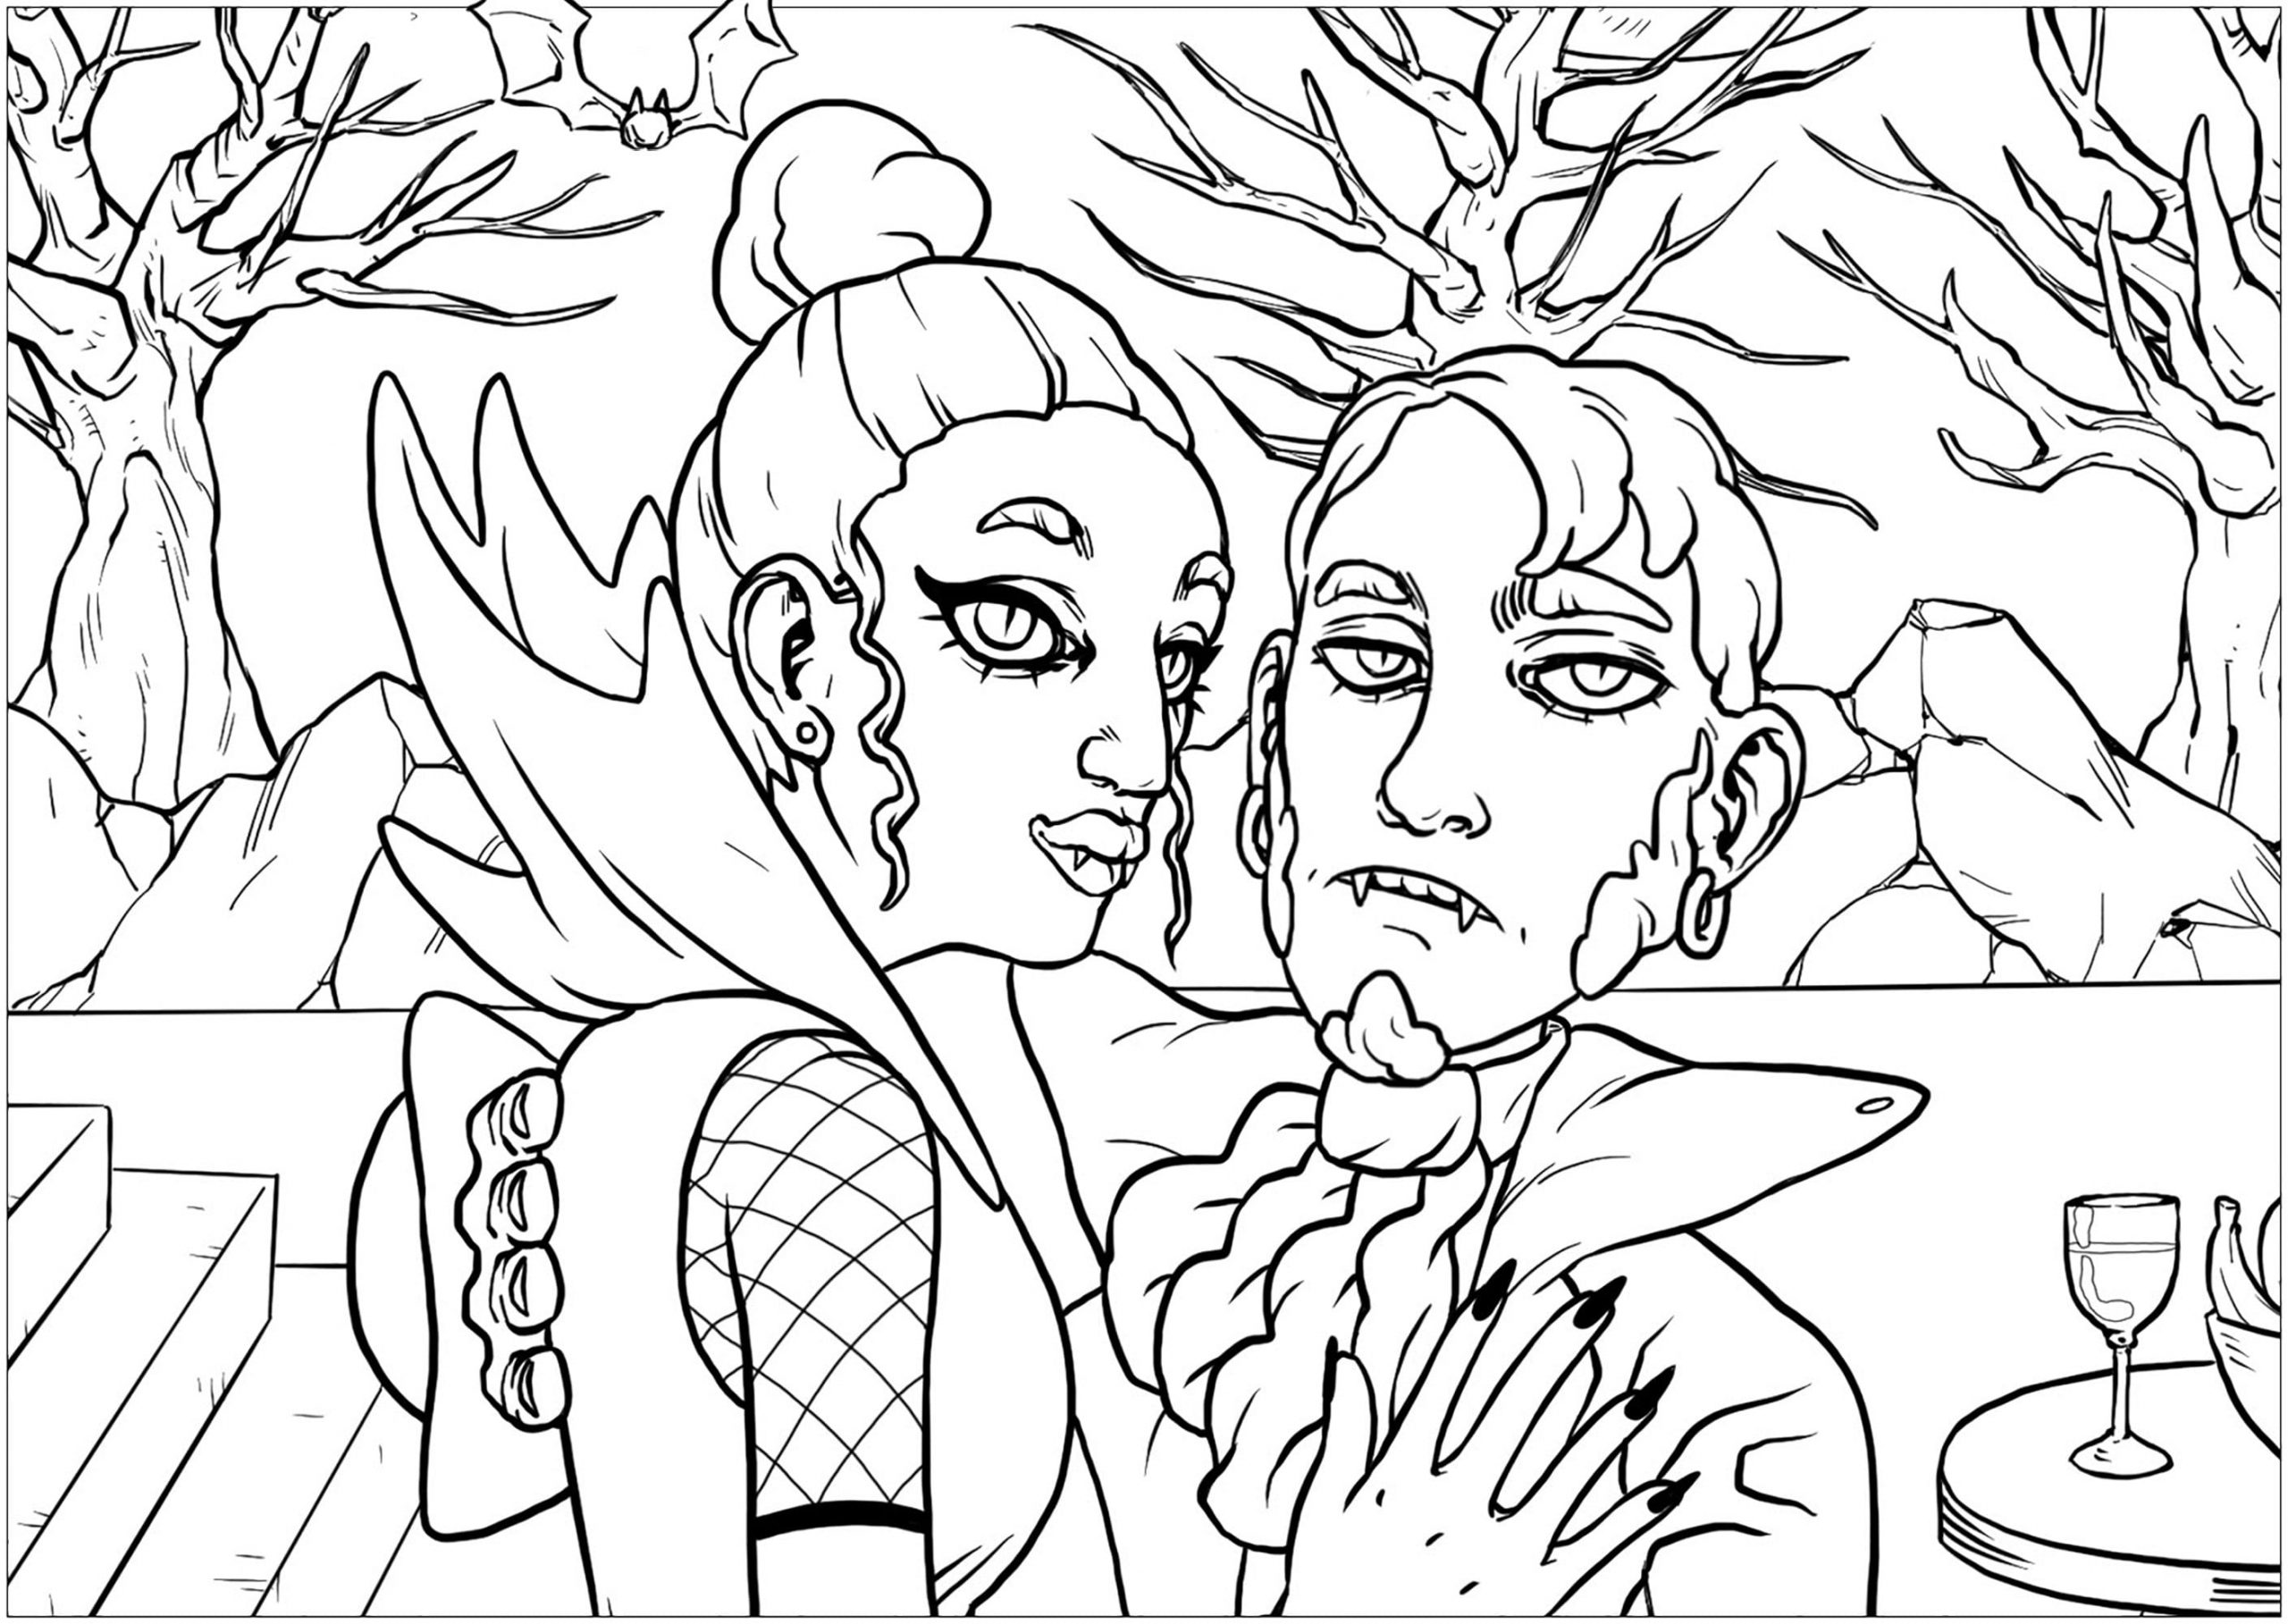 Couple Of Vampires Portrait Version Image For Kids Coloring Page